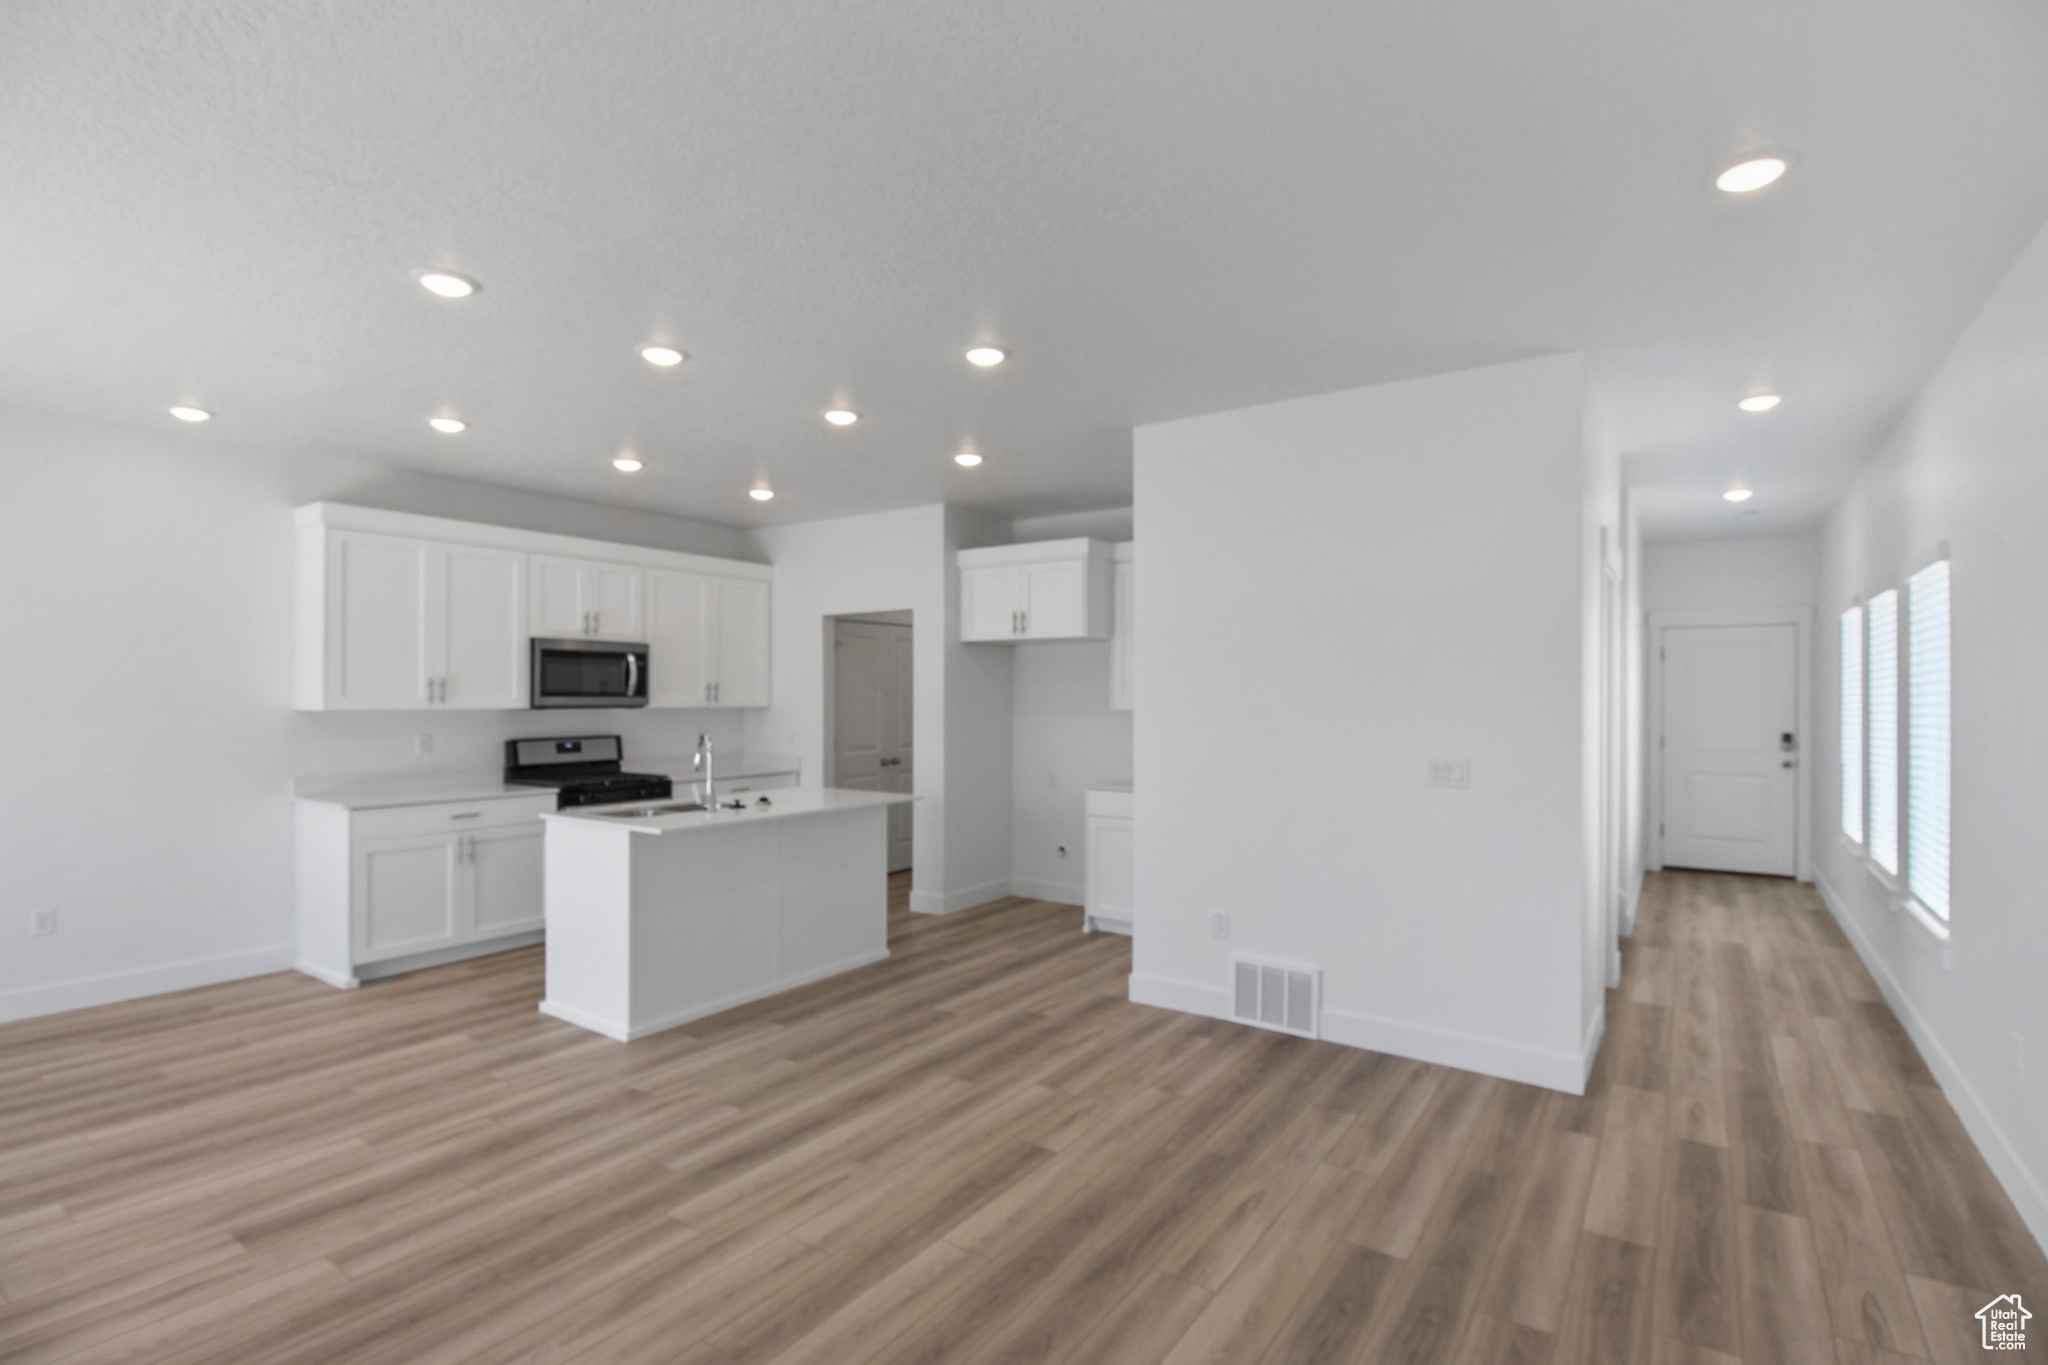 Living Room, Dining Room, and Kitchen with appliances with stainless steel finishes, light hardwood / wood-style flooring, a kitchen island with sink, and white cabinetry *Photo is of a previously build home. Listed Home is not an end unit. No windows in